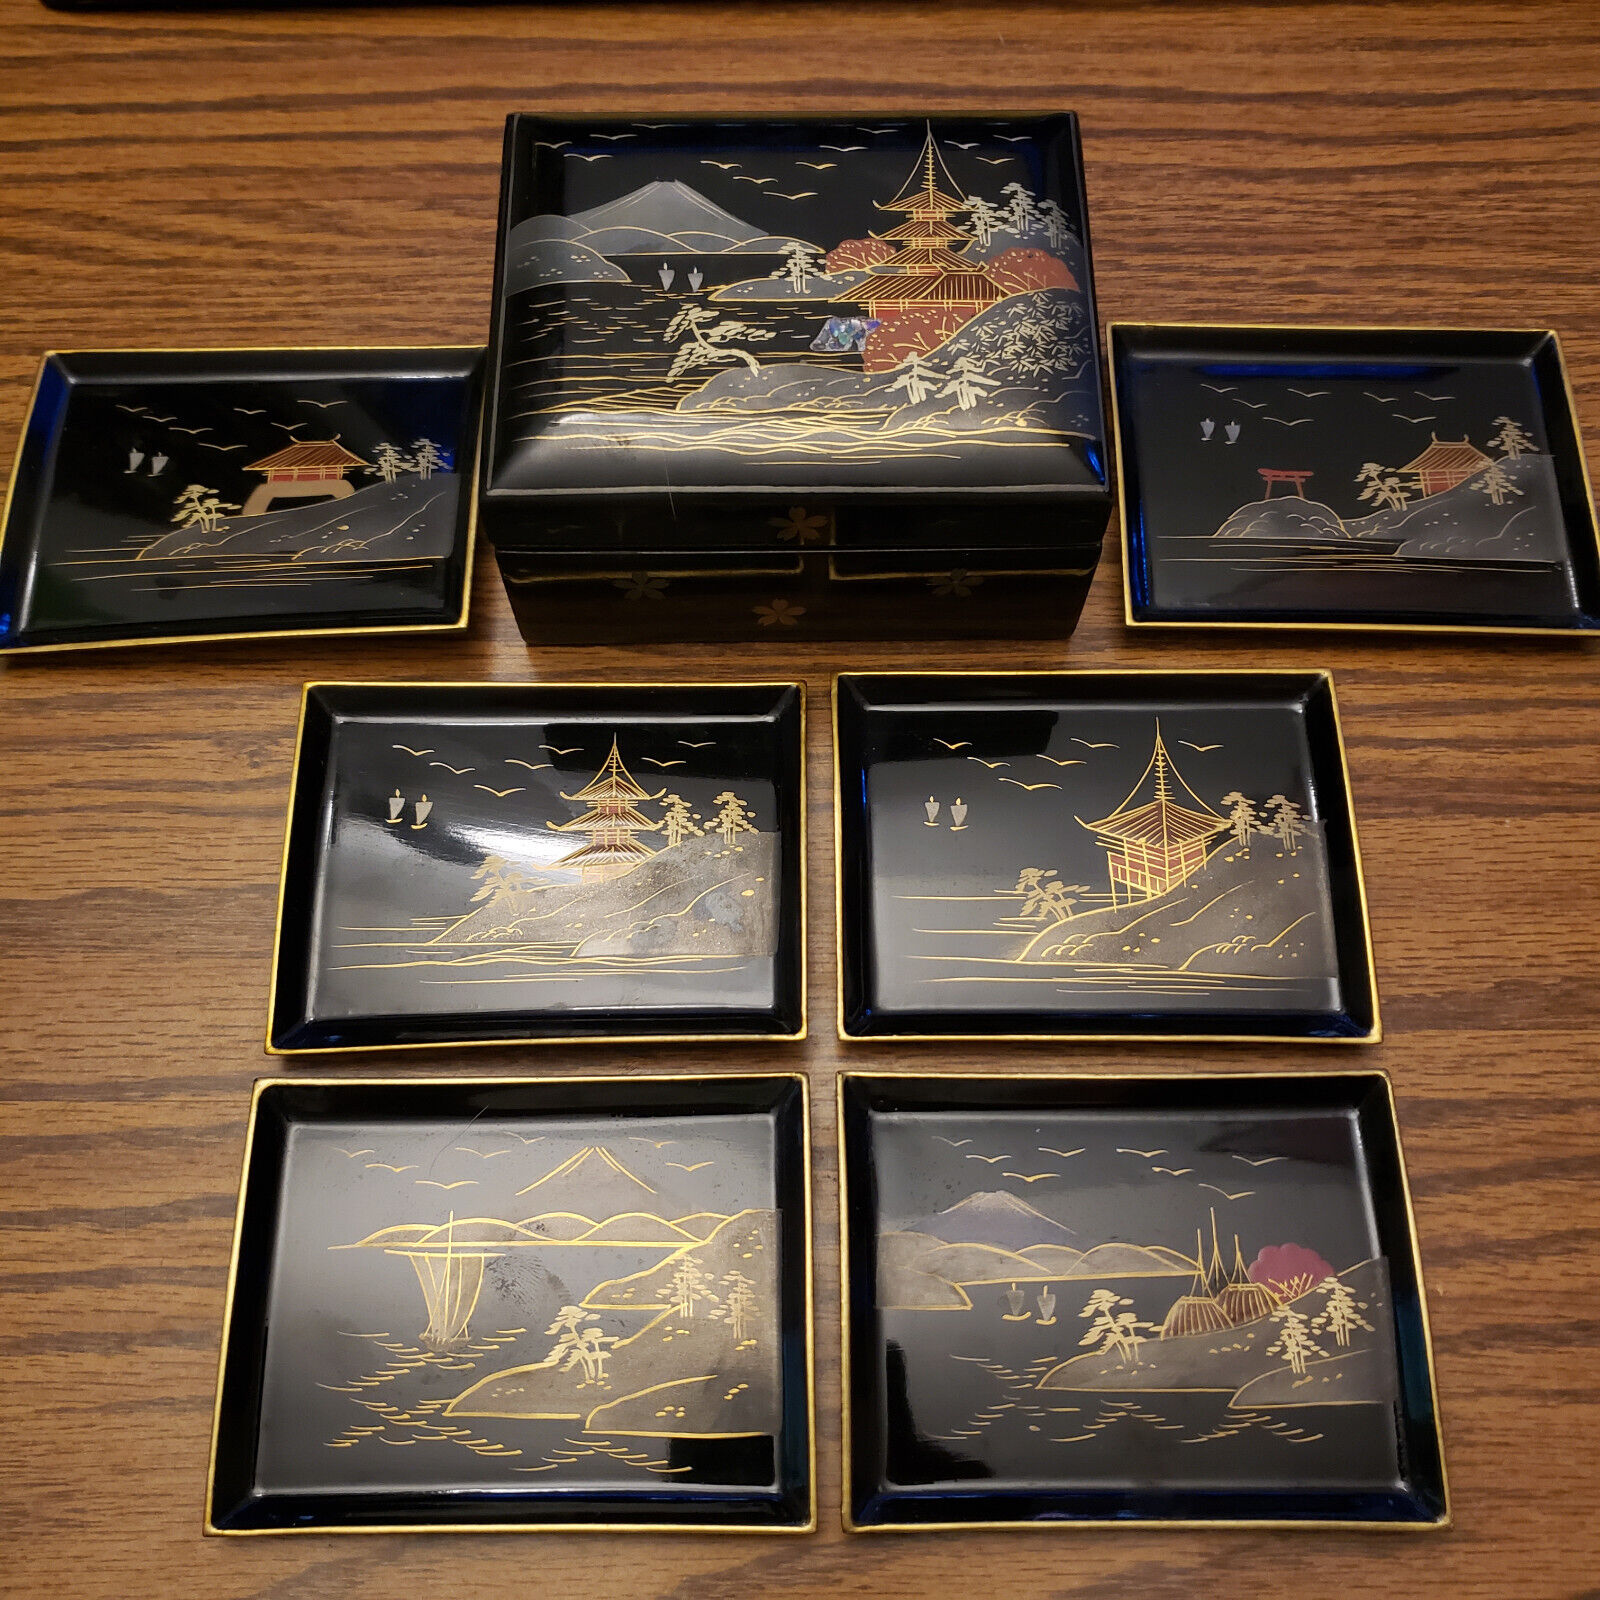 Vintage Japanese Lacquer Box and Trays with Painted Scenes